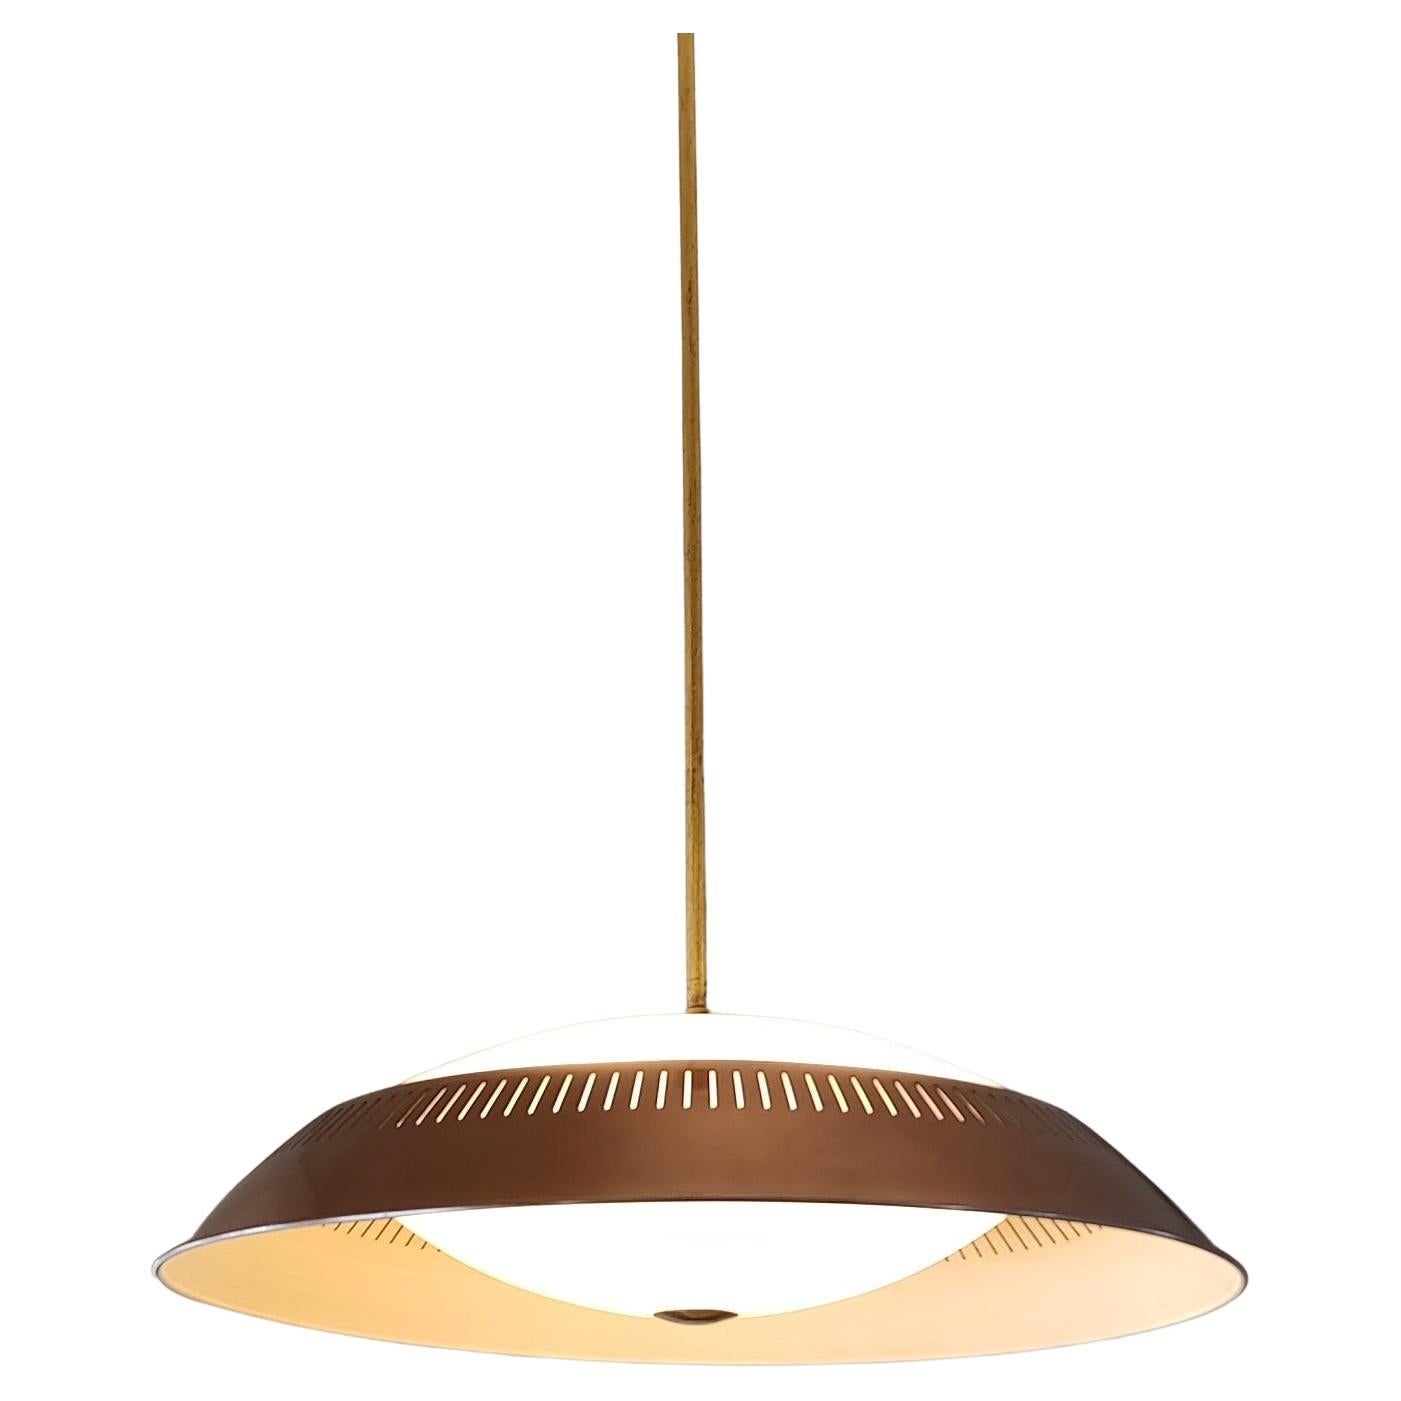 Lisa Johansson-Pape Ceiling Lamp, Model 1102, Procuded by Orno in Finland, 1953 For Sale